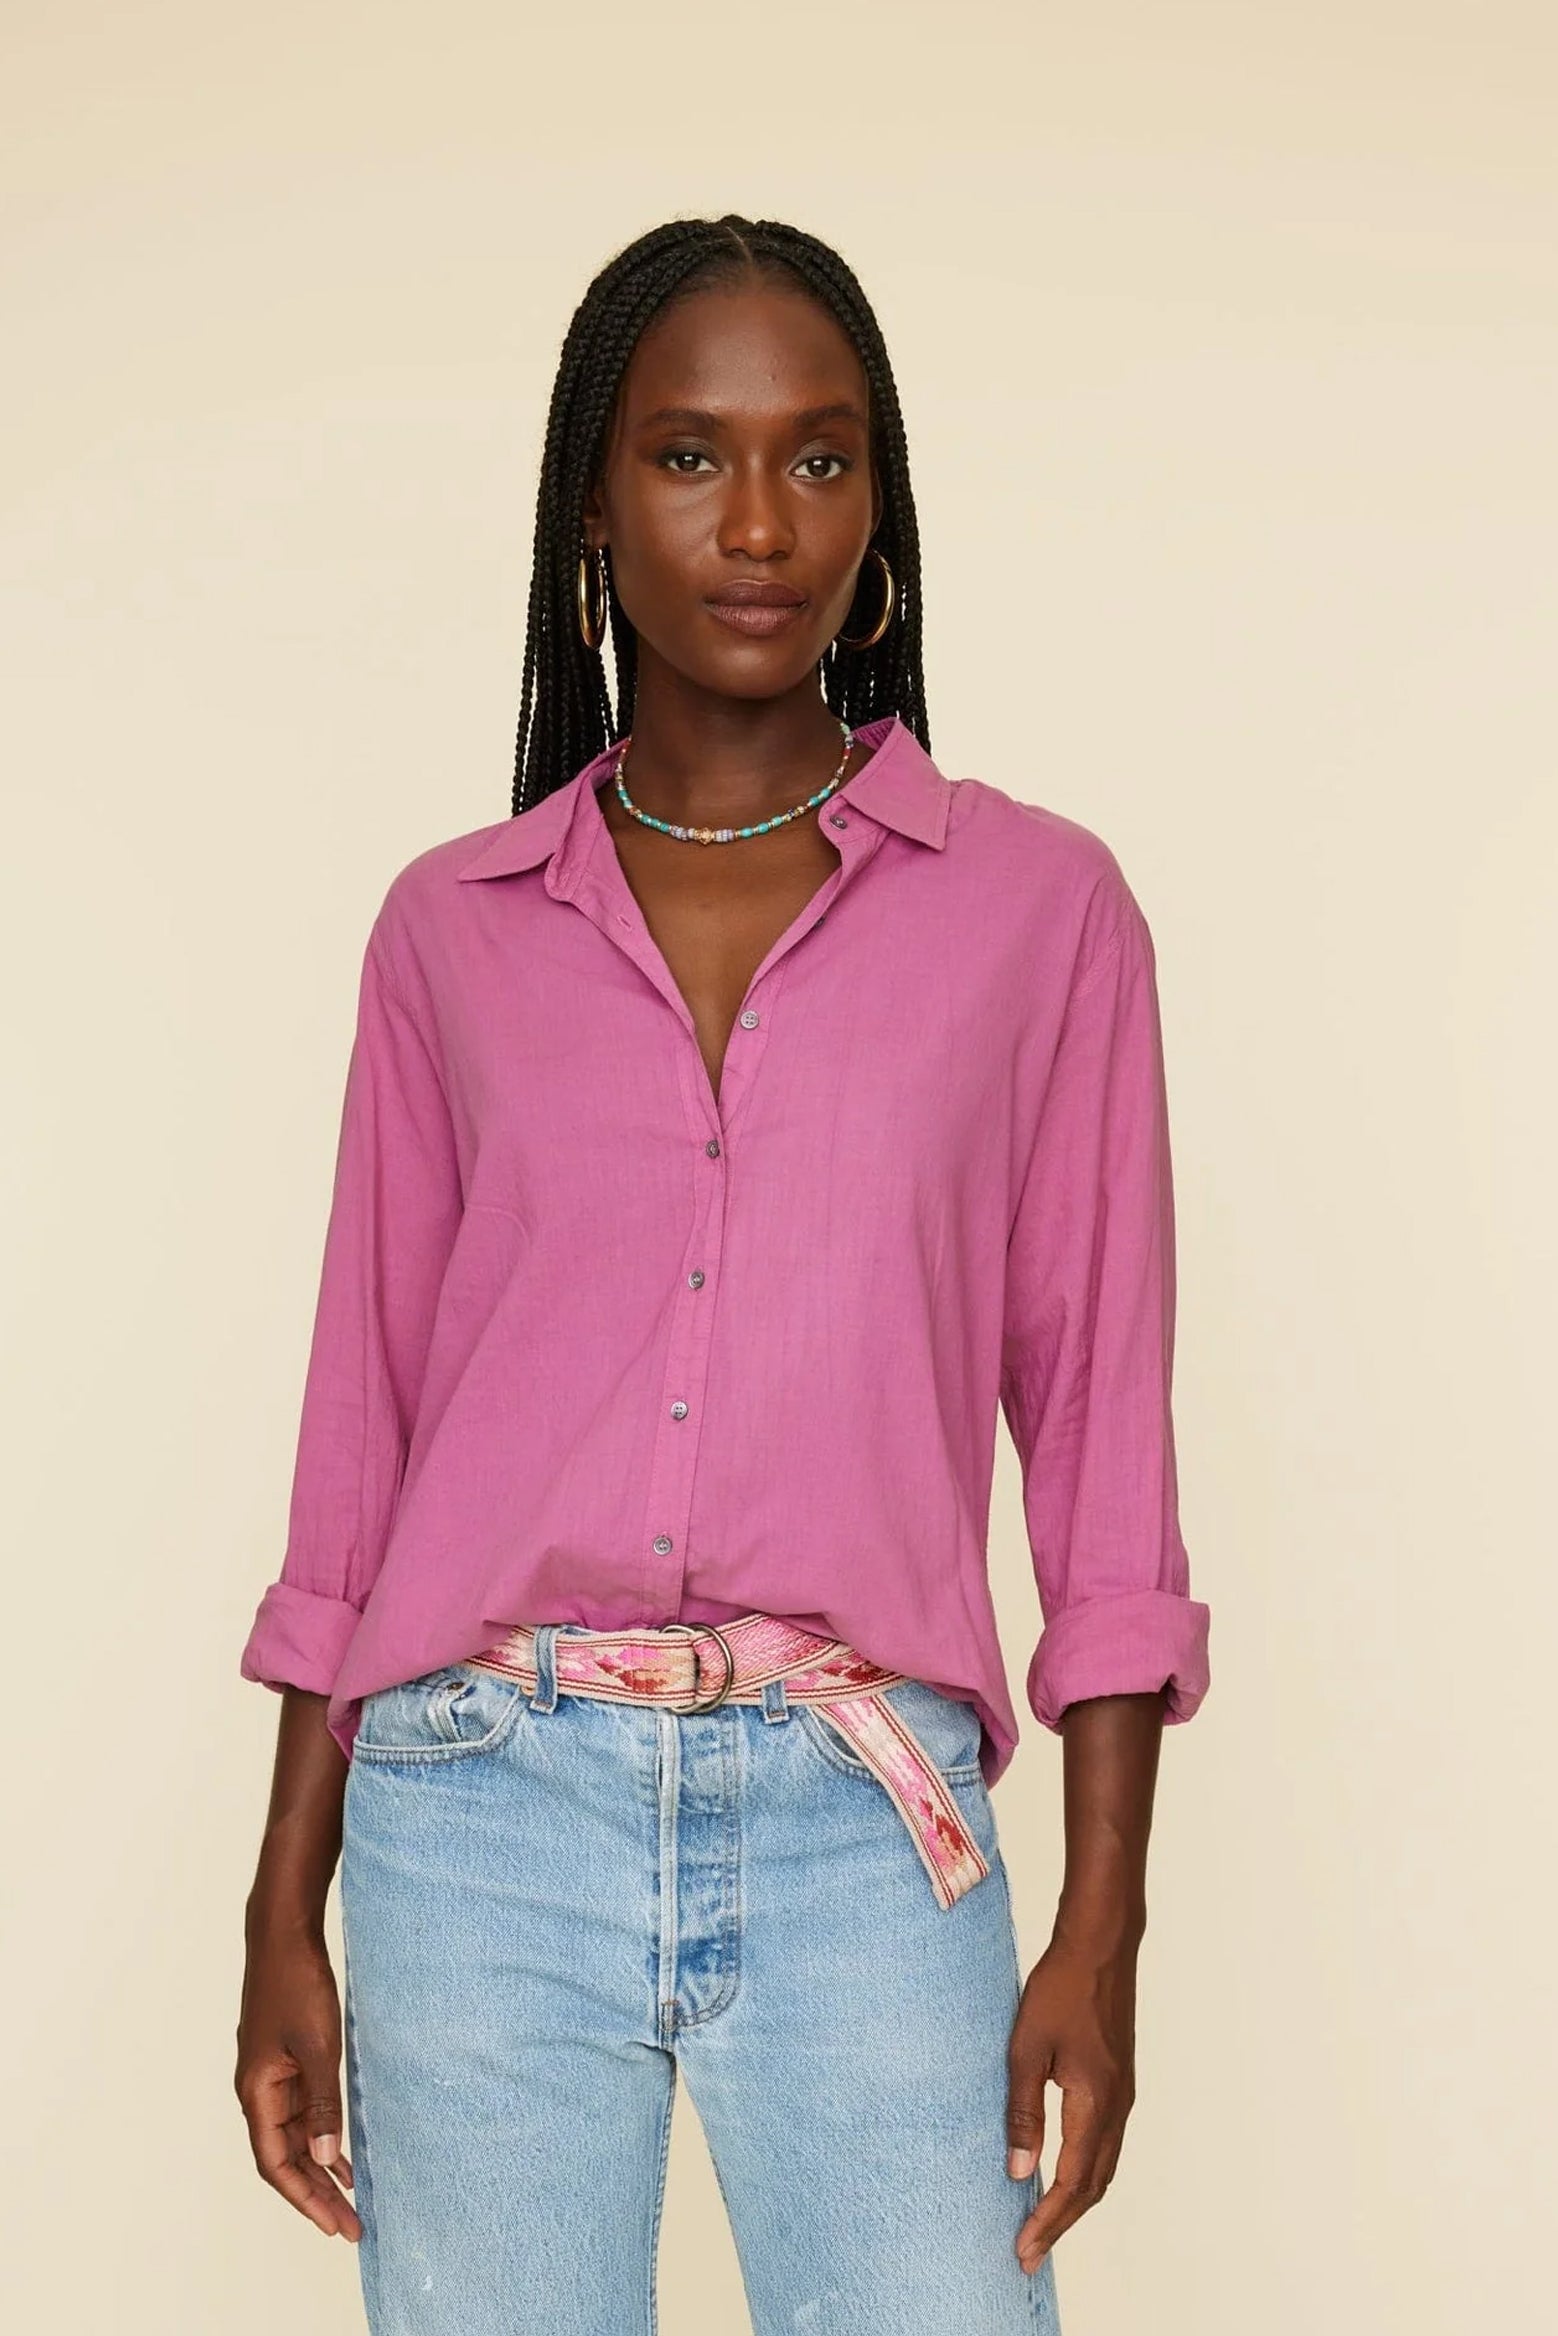 The Xirena Beau Shirt in Rose Tea available at The New Trend Australia